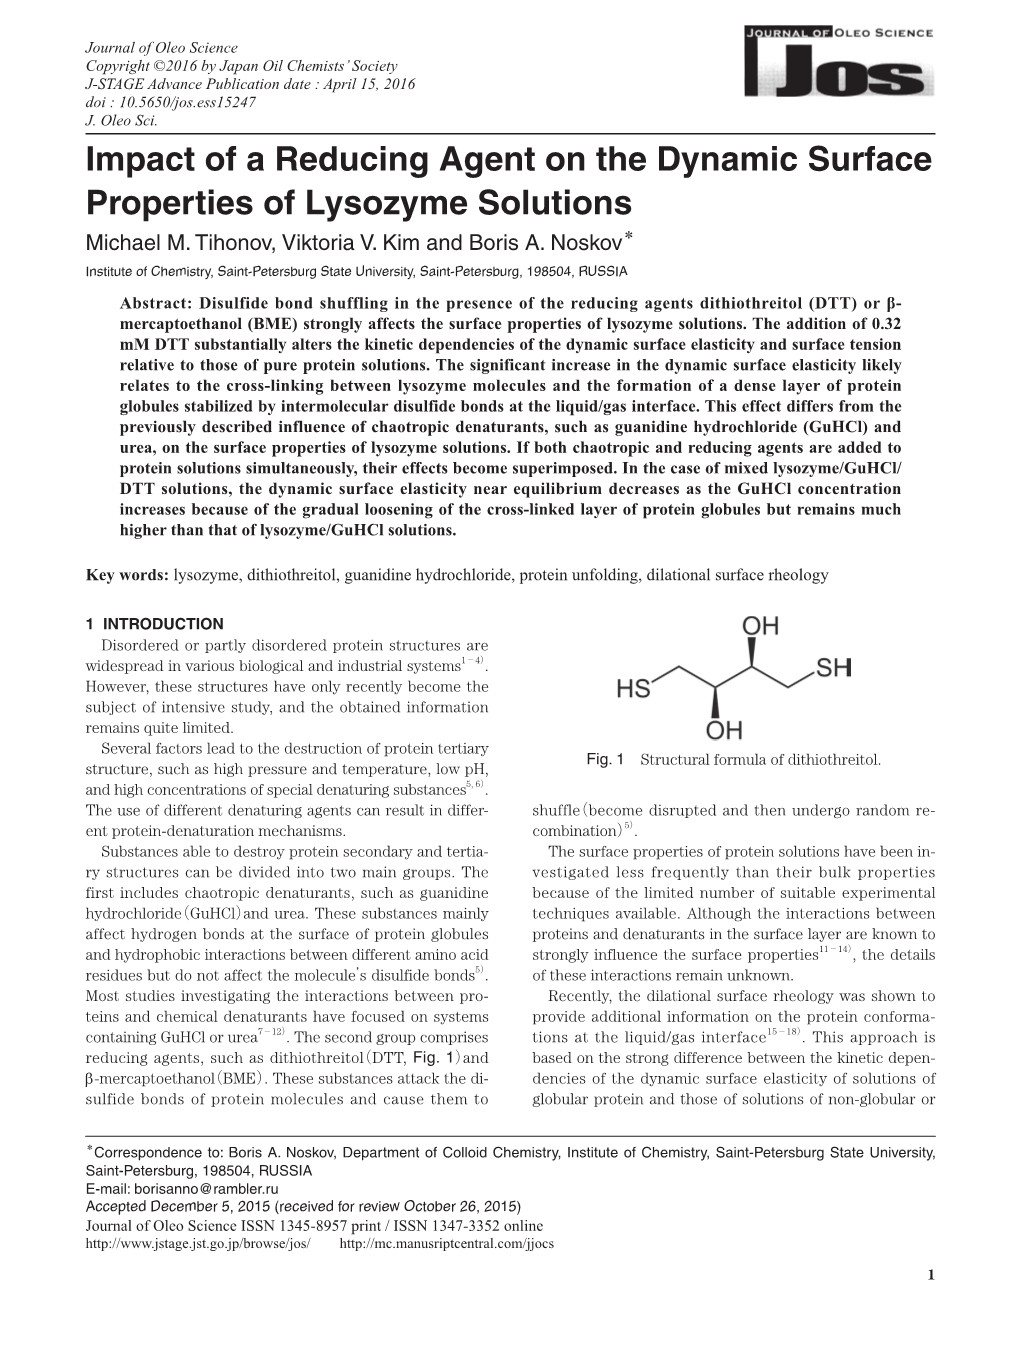 Impact of a Reducing Agent on the Dynamic Surface Properties of Lysozyme Solutions Michael M